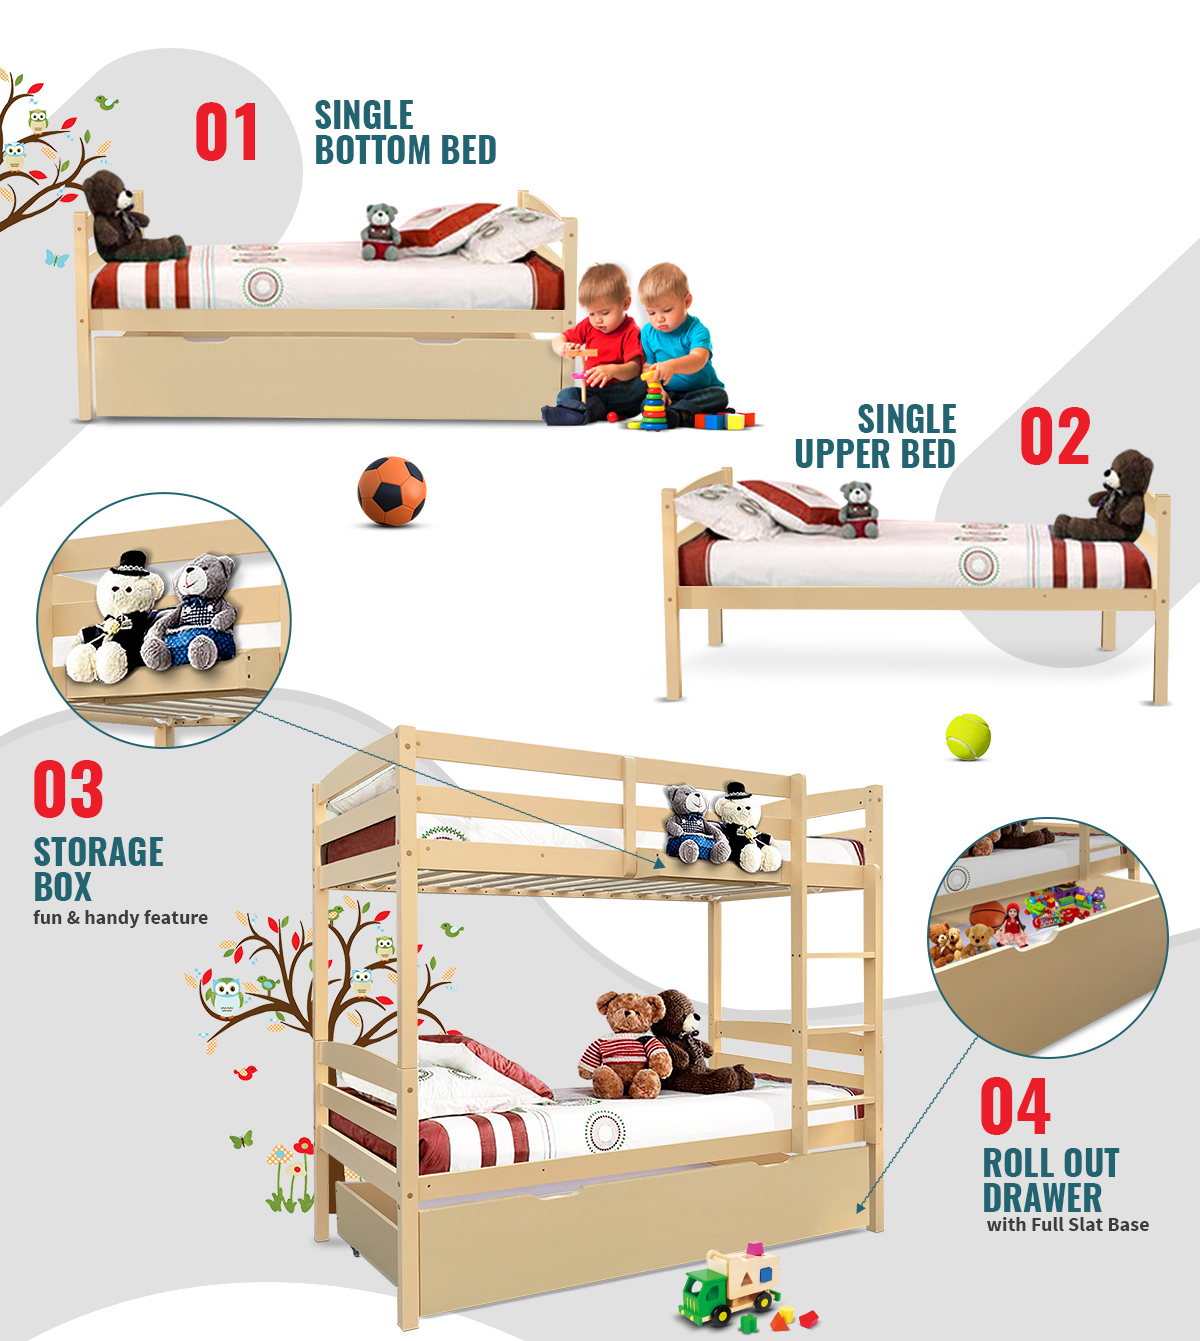 Royal Sleep Brown Wooden Single Bunk Bed for Kids